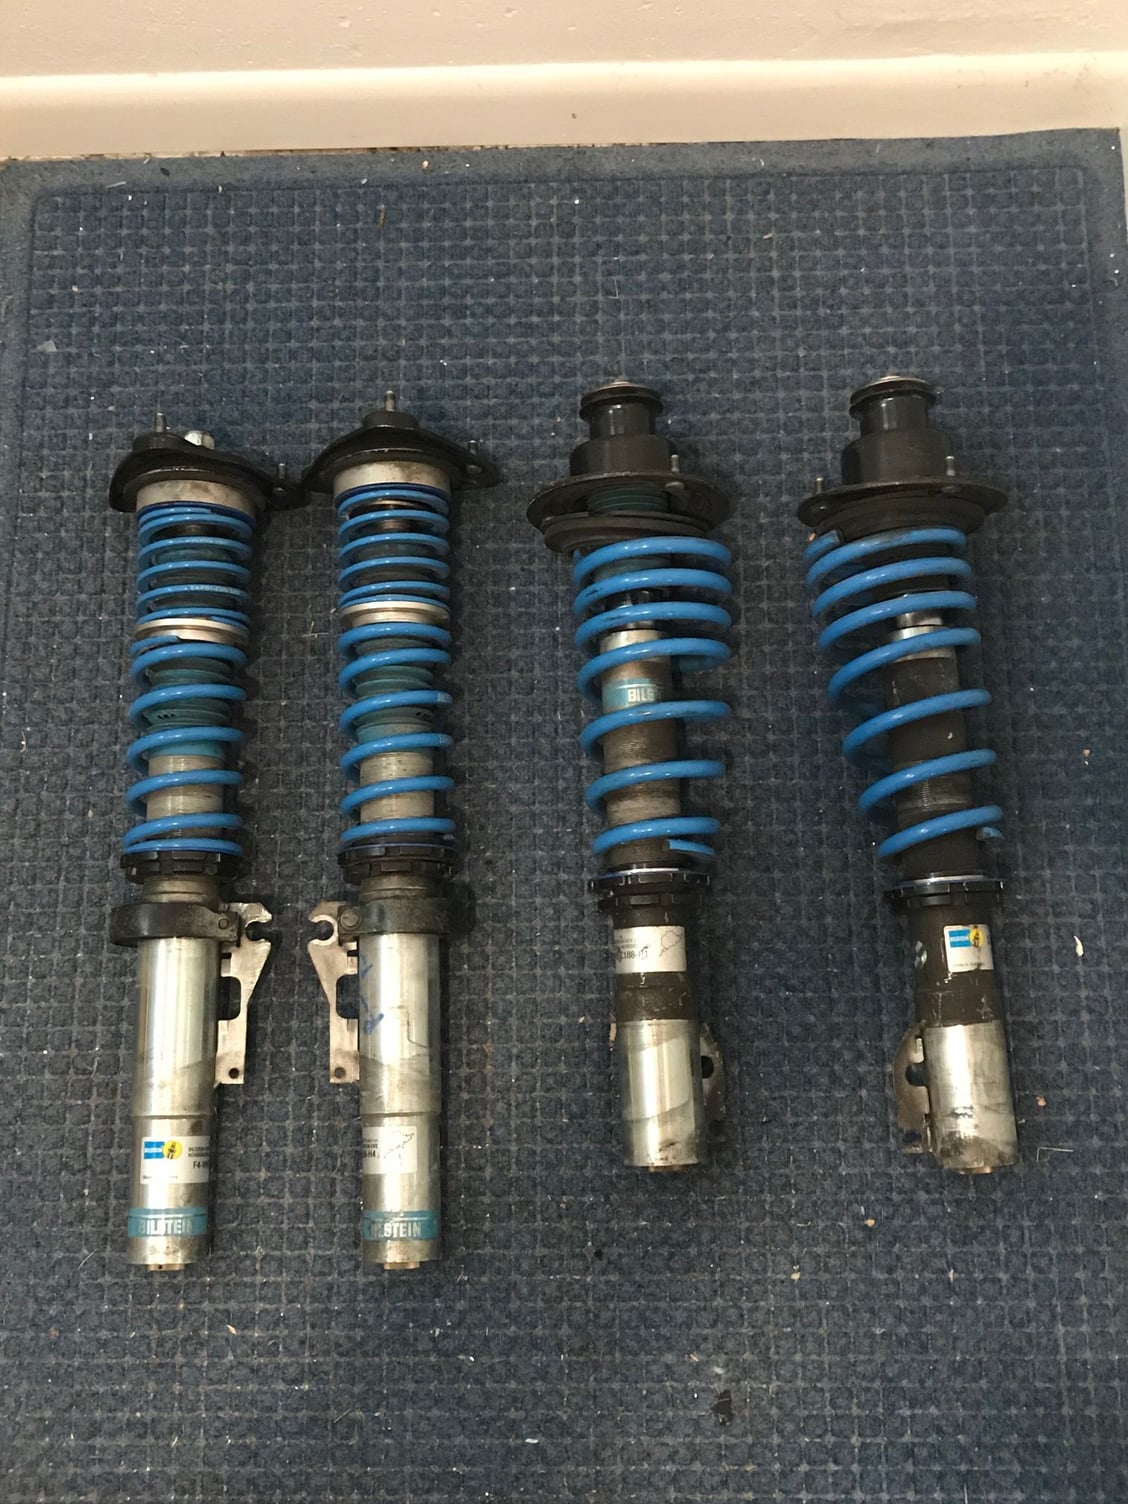 Steering/Suspension - Bilstein PSS9s for 987 - Used - 2006 to 2011 Porsche Boxster - 2006 to 2011 Porsche Cayman - Plymouth, MI 48170, United States